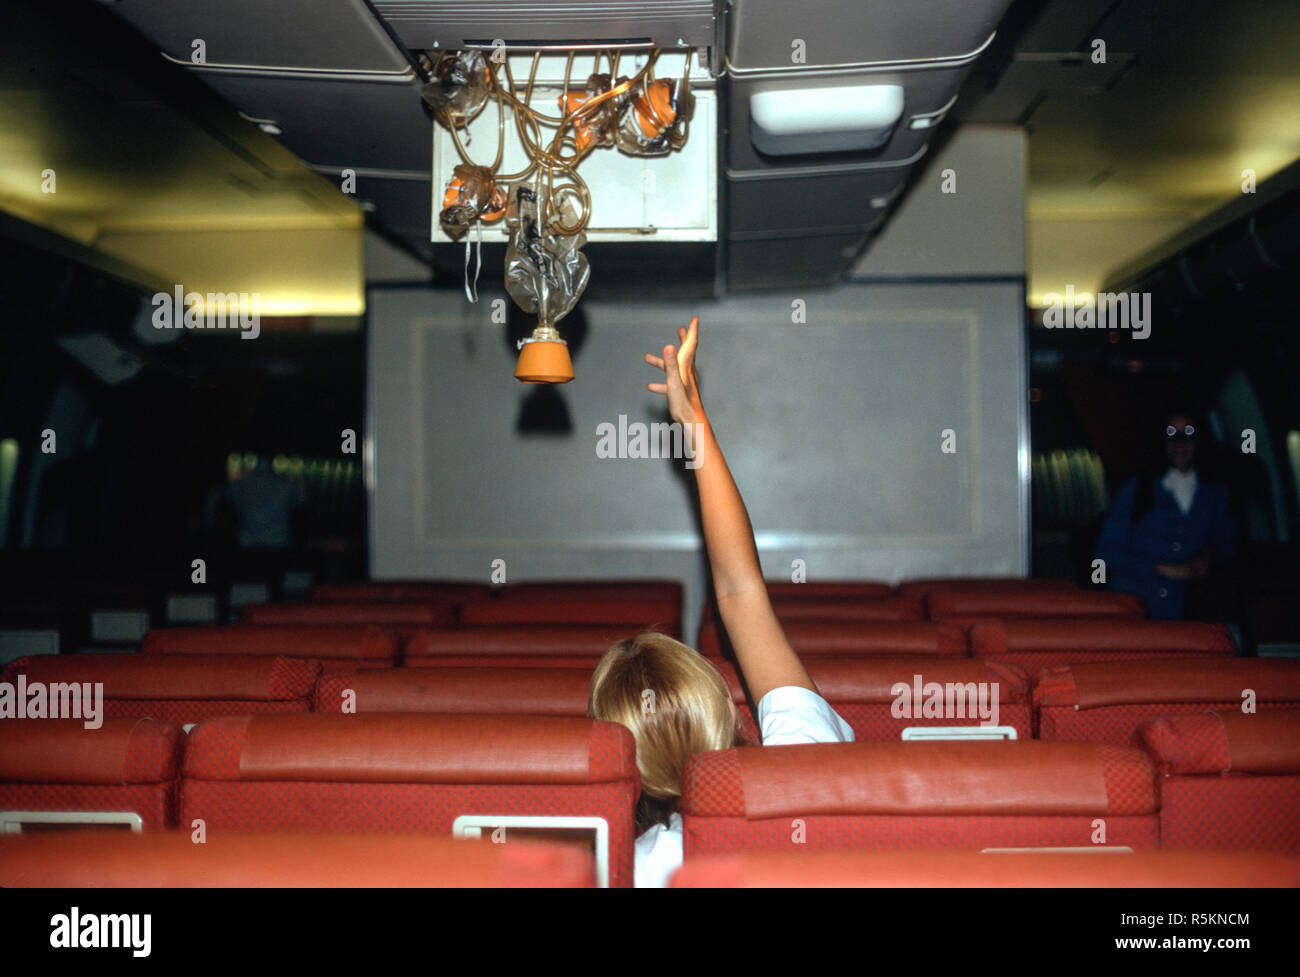 Blond Woman Reaching for a Oxygen Mask in a 747 Commercial Airline, USA Stock Photo